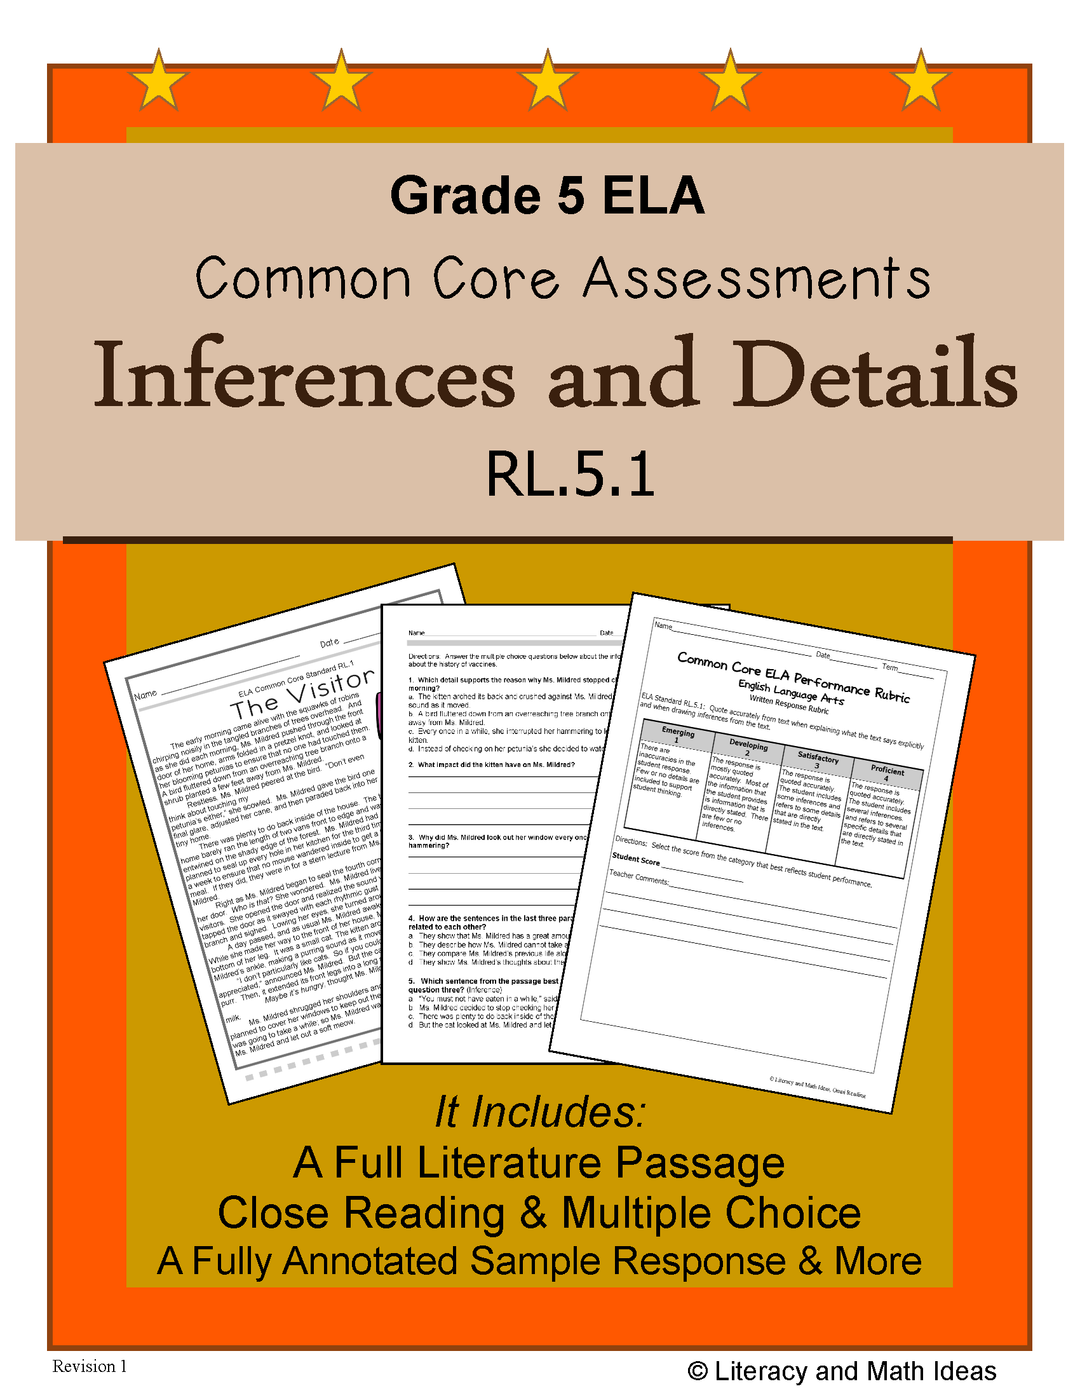 Grade 5 Common Core Assessments: Inferences and Details RL.5.1